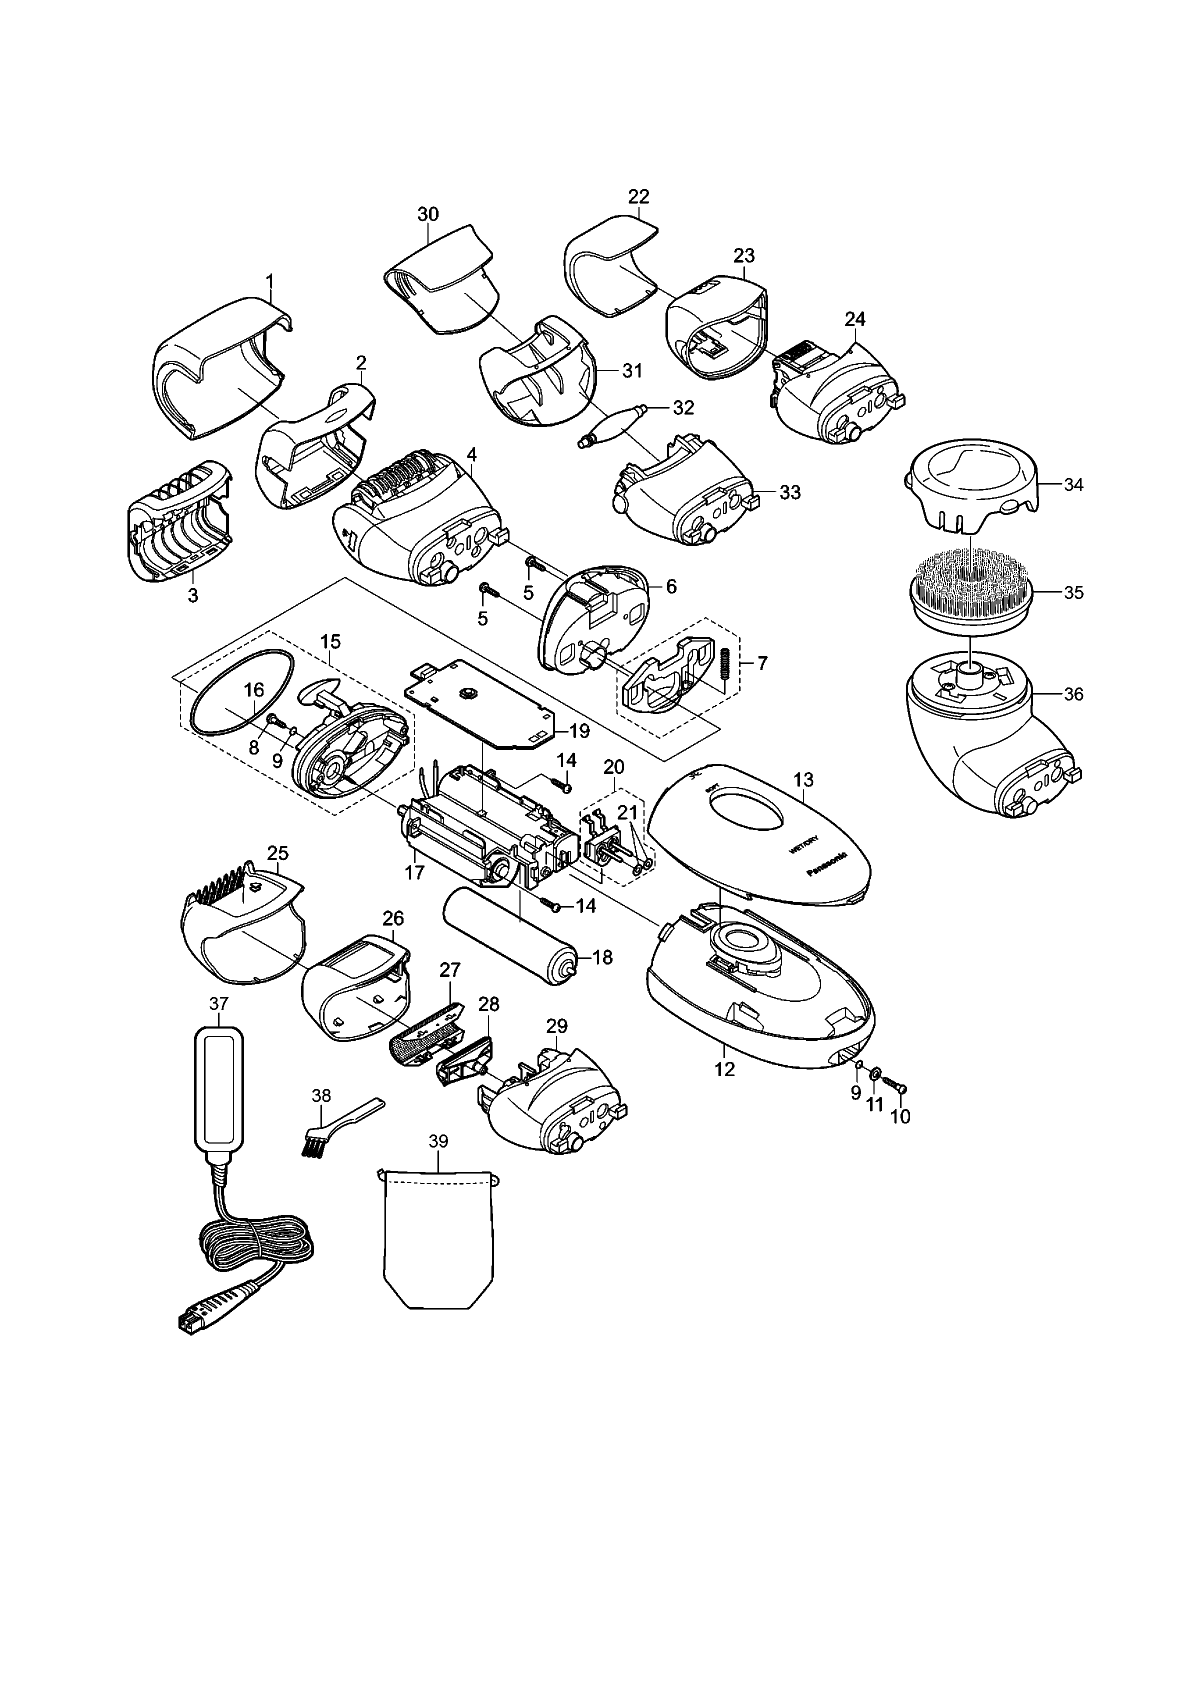 ES-ED94: Exploded View